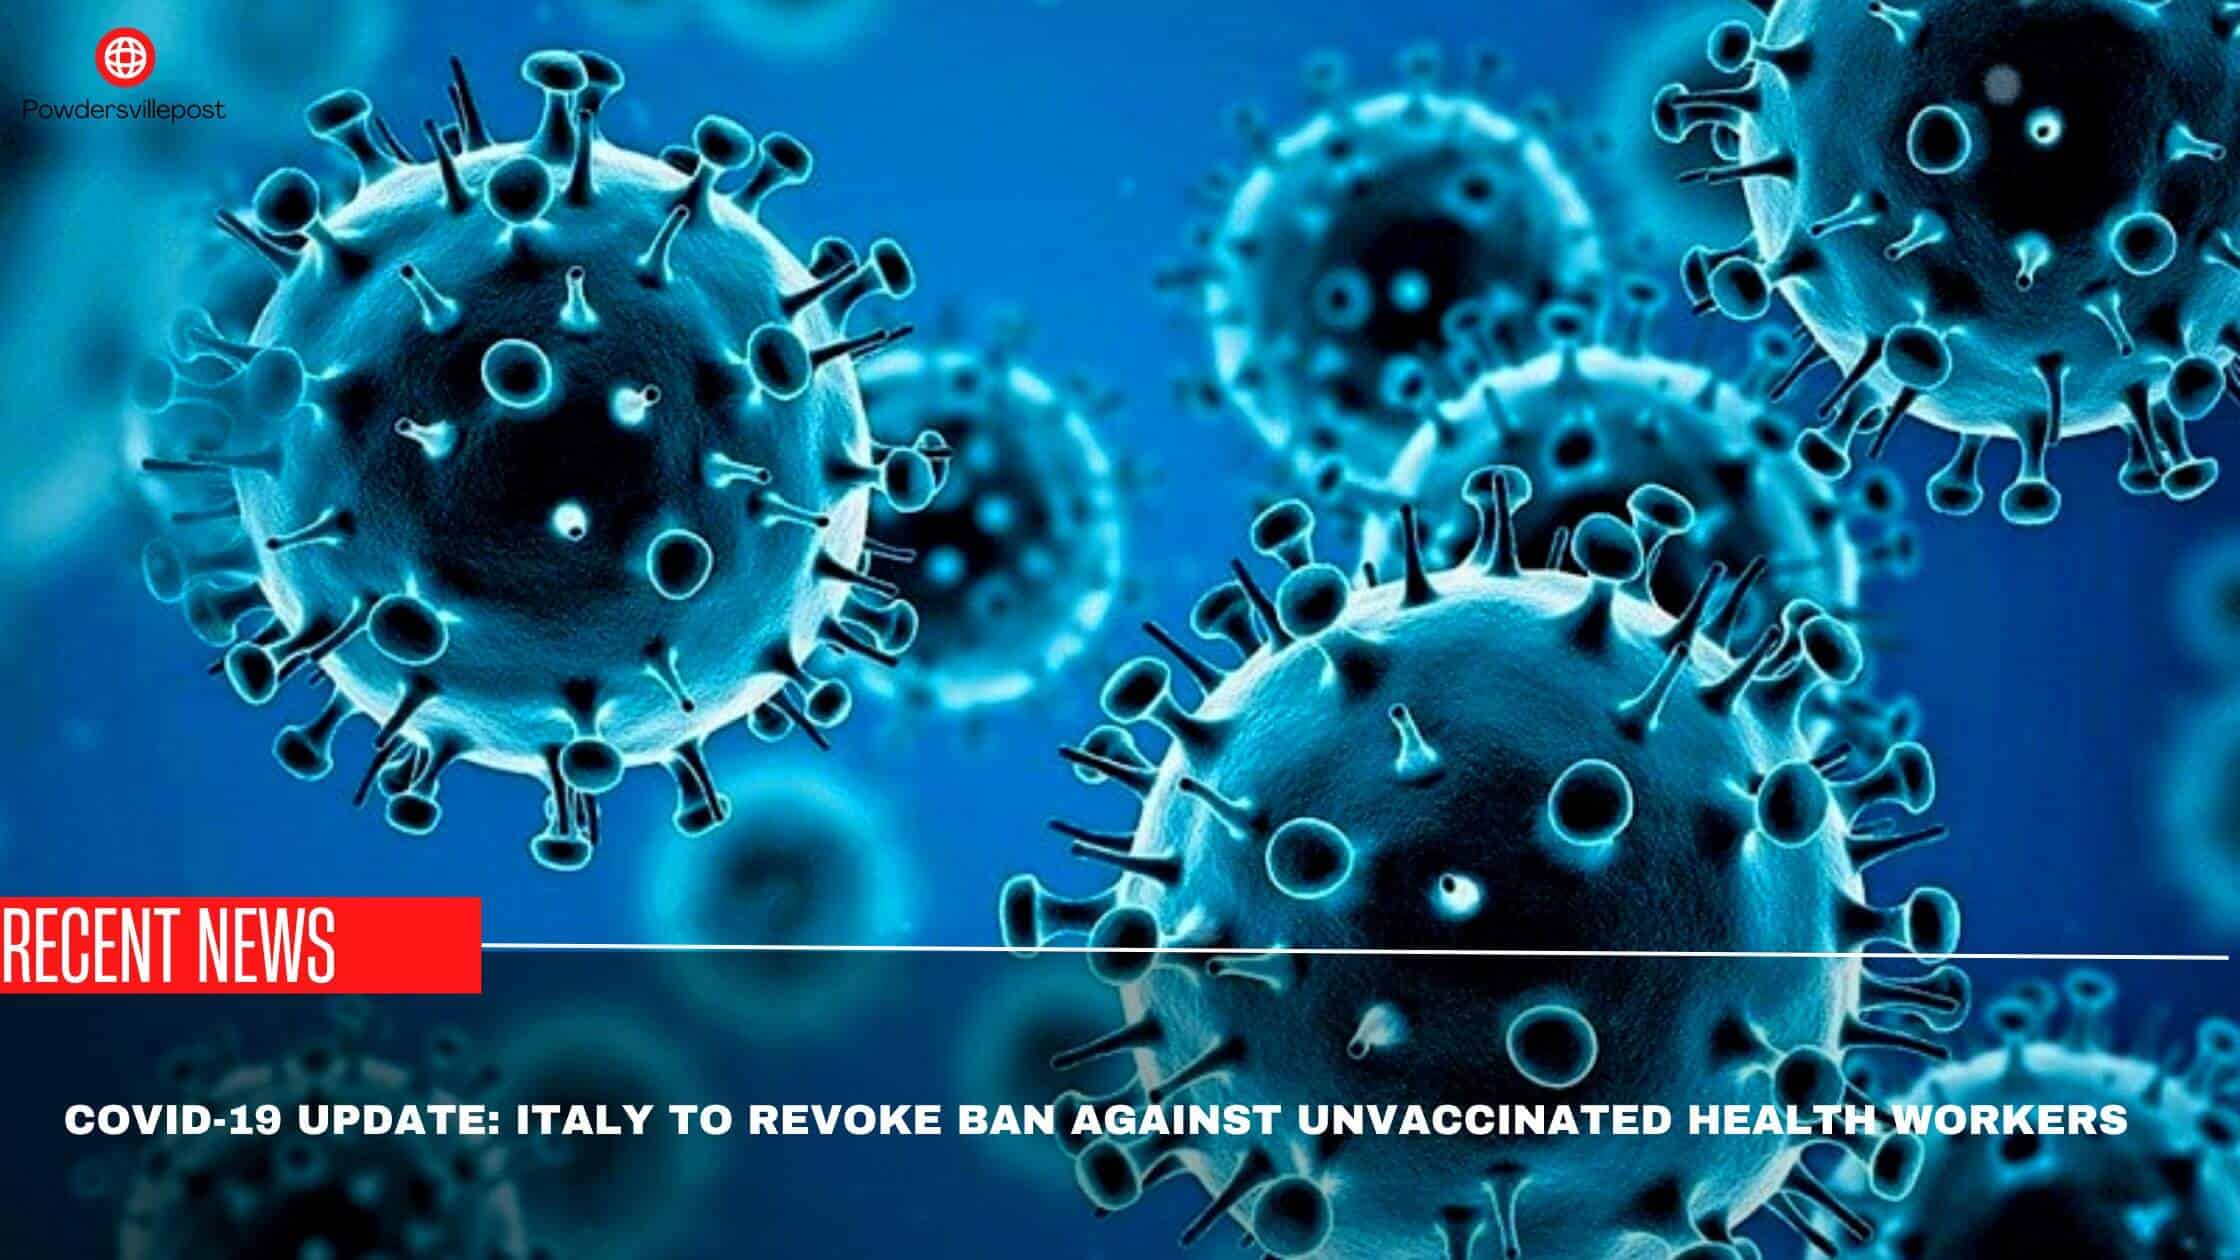 Covid-19 Update Italy To Revoke Ban Against Unvaccinated Health Workers